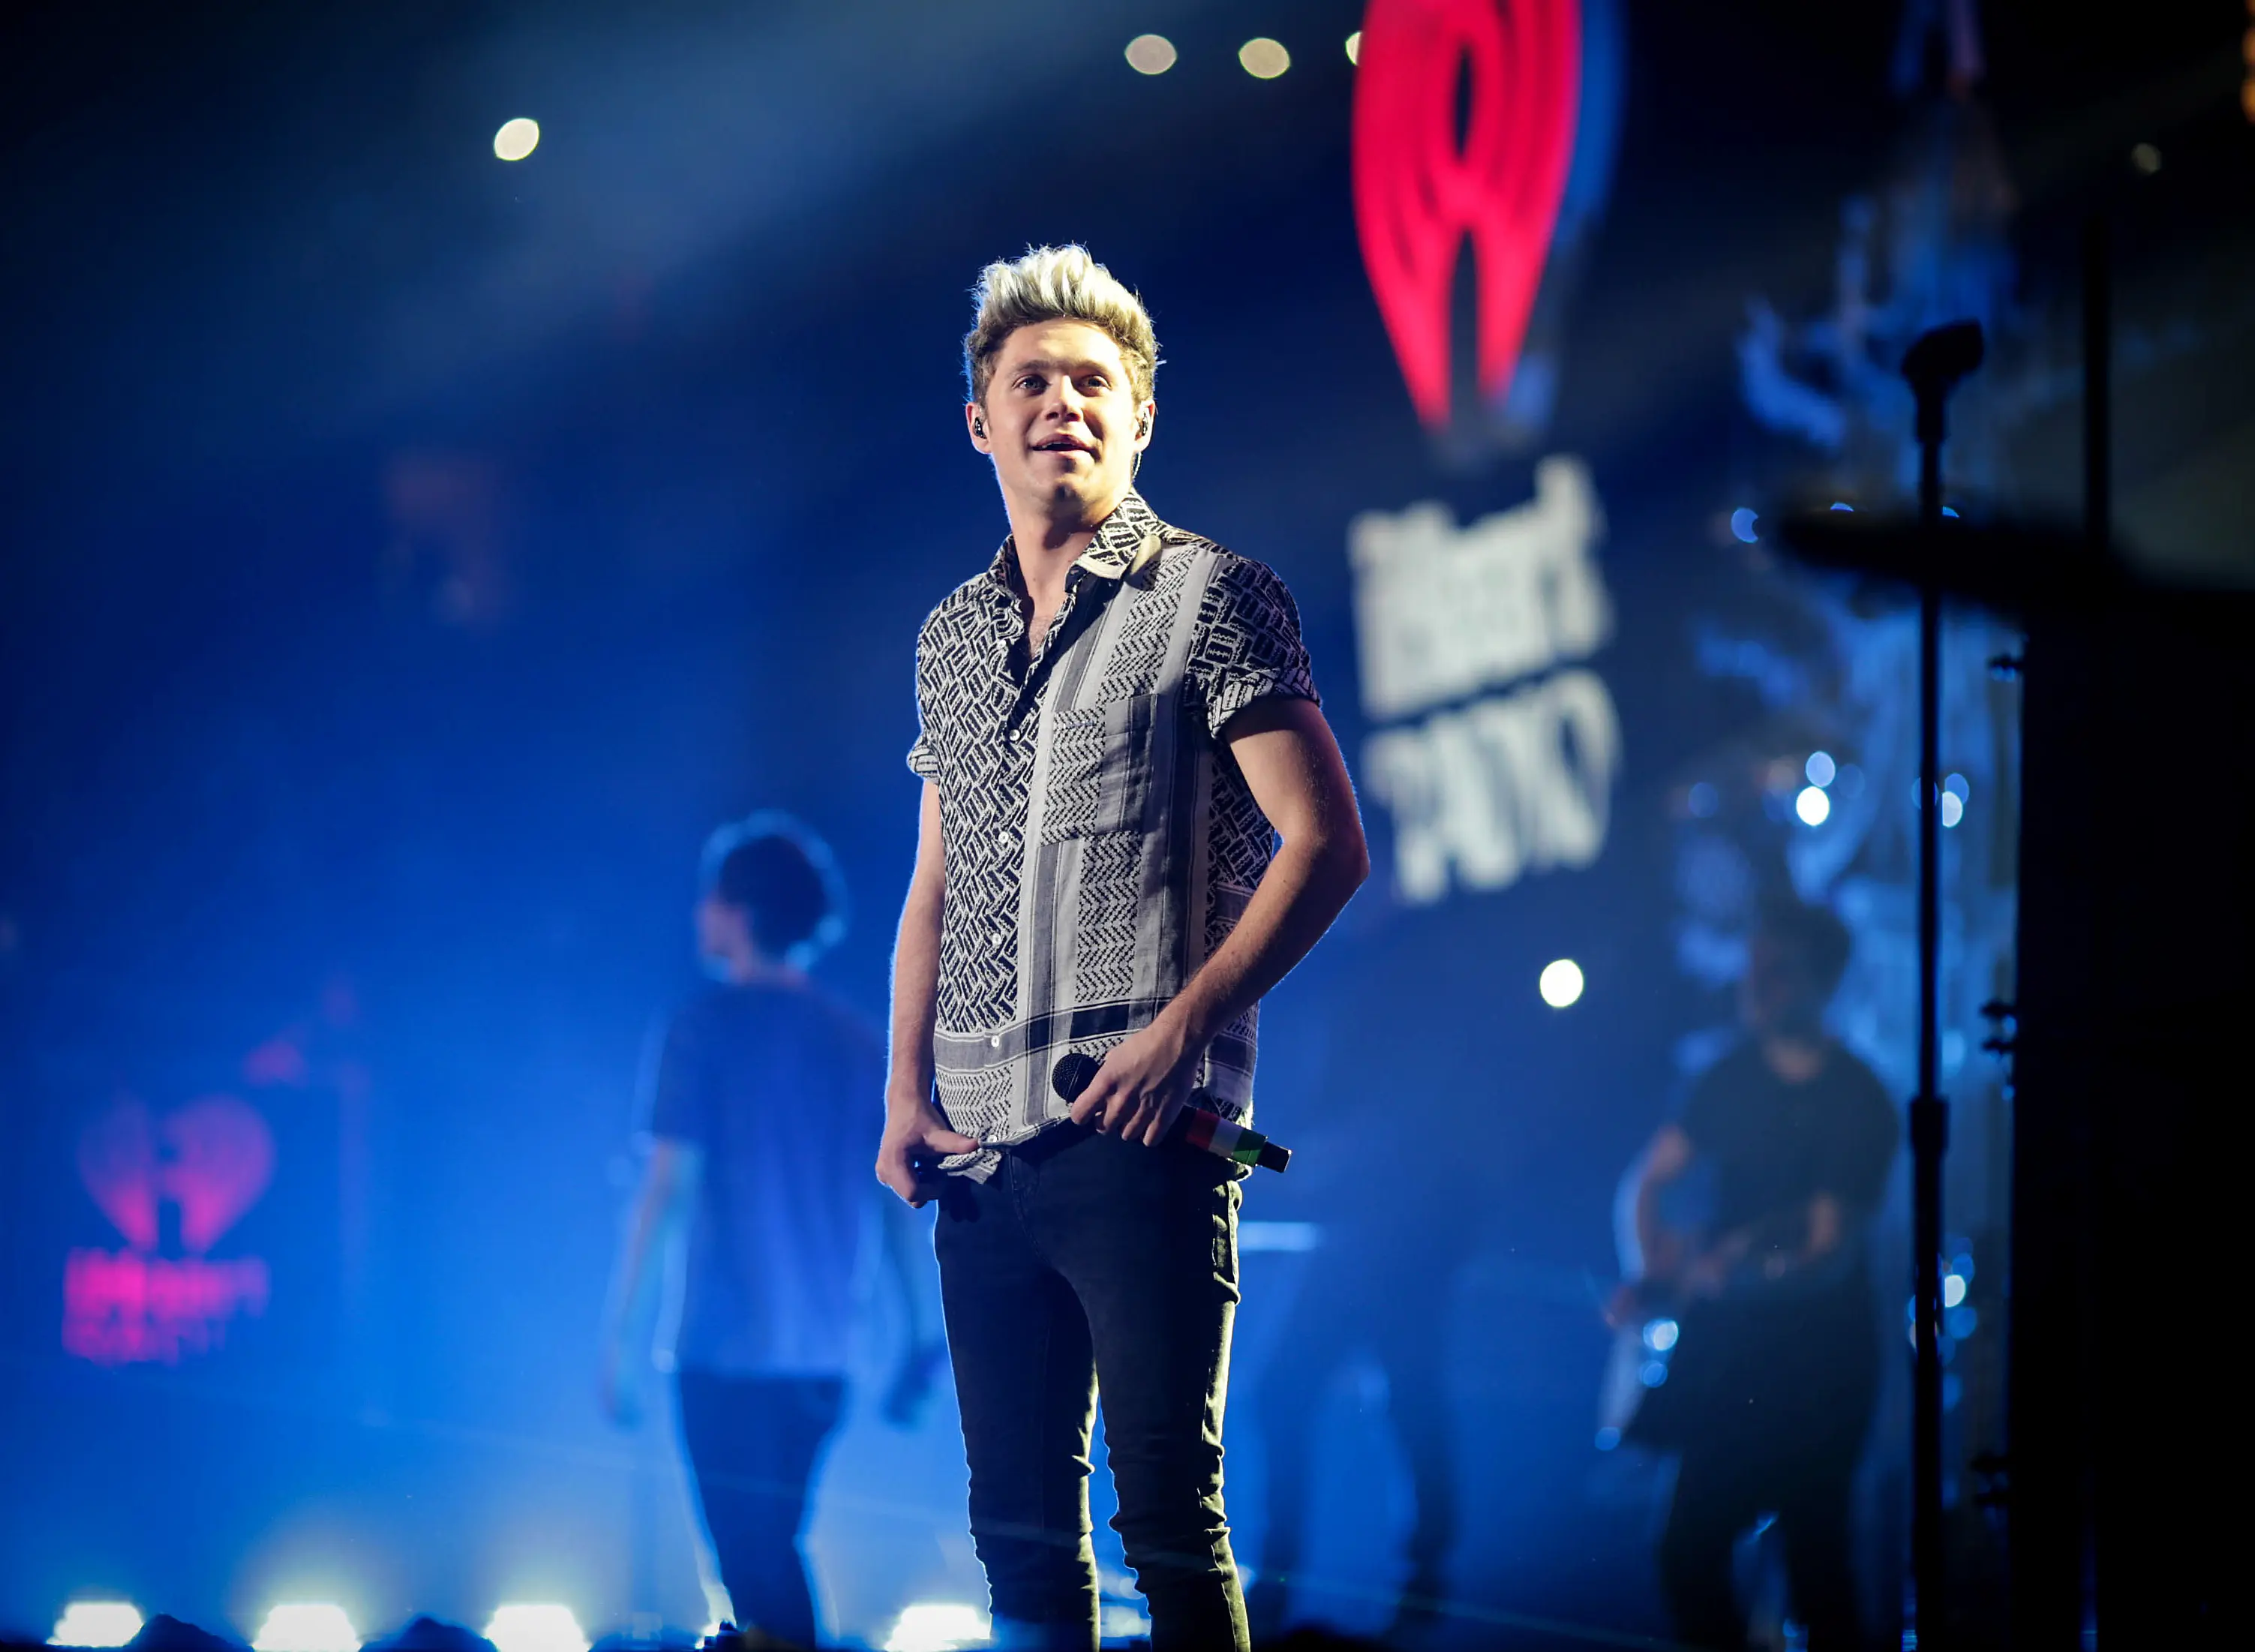 Niall Horan (AFP/ CHRISTOPHER POLK / GETTY IMAGES NORTH AMERICA)